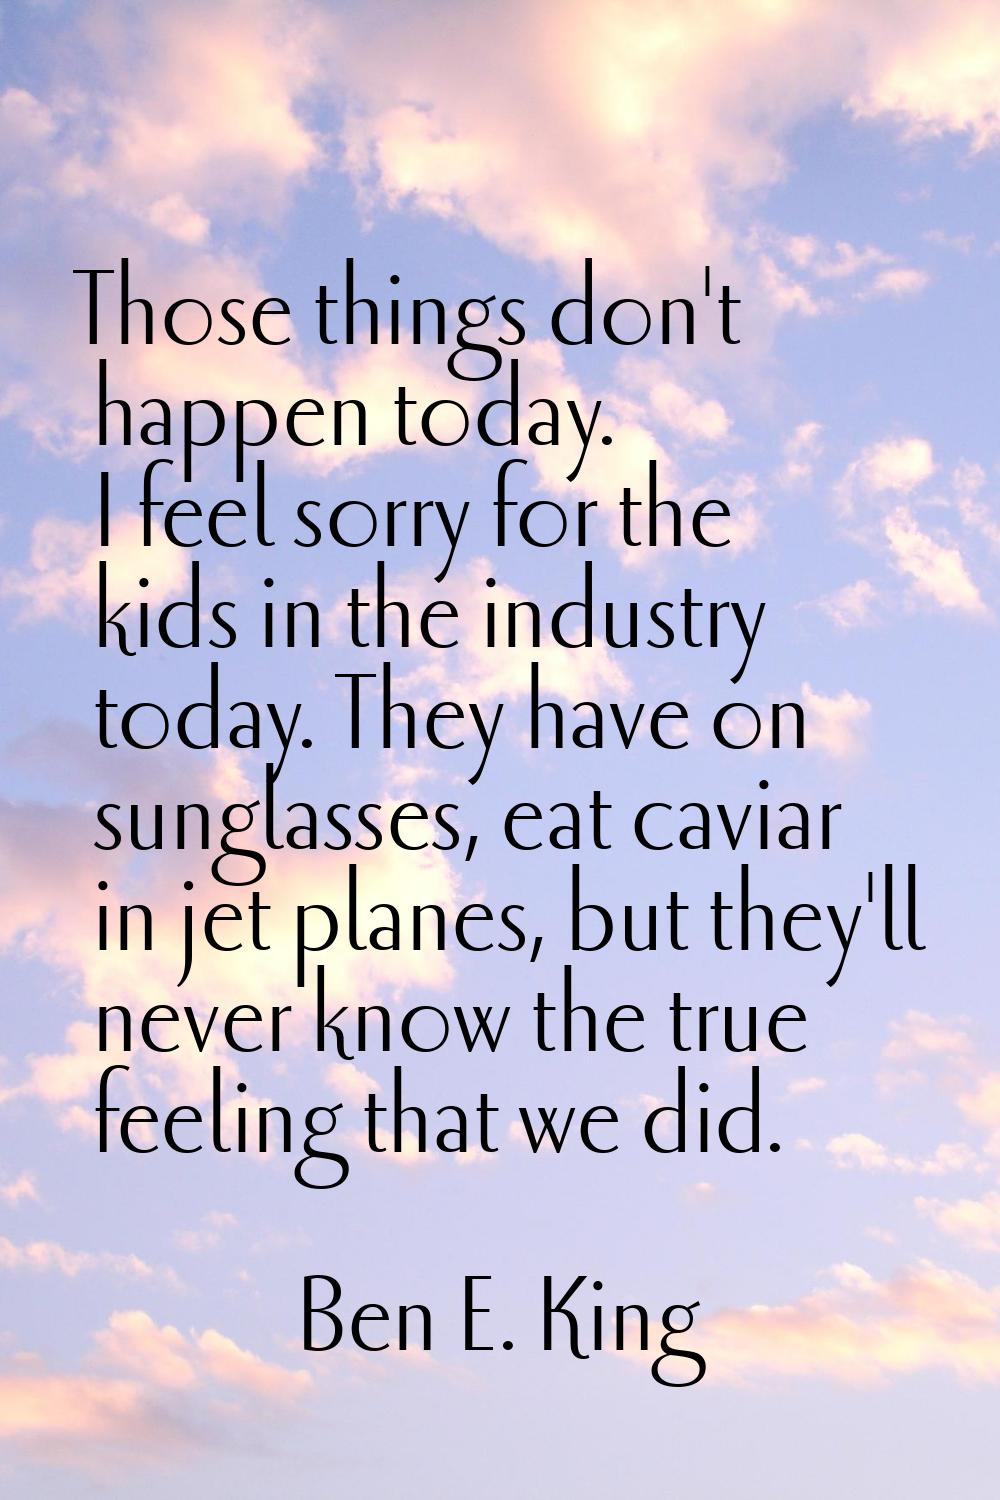 Those things don't happen today. I feel sorry for the kids in the industry today. They have on sung